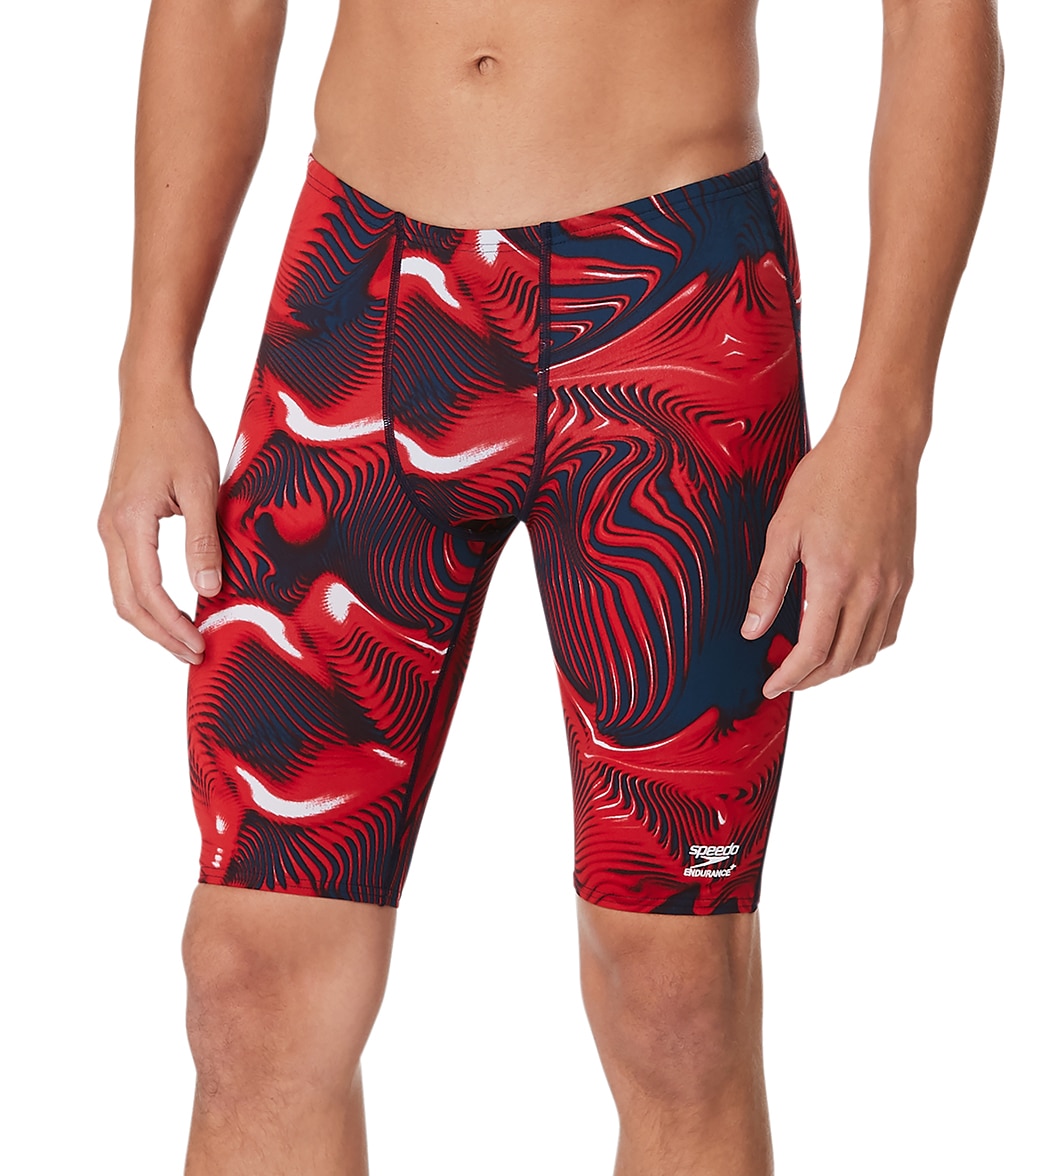 Speedo Men's Fusion Vibe Jammer Swimsuit - Red/White/Blue 24 Polyester/Pbt - Swimoutlet.com